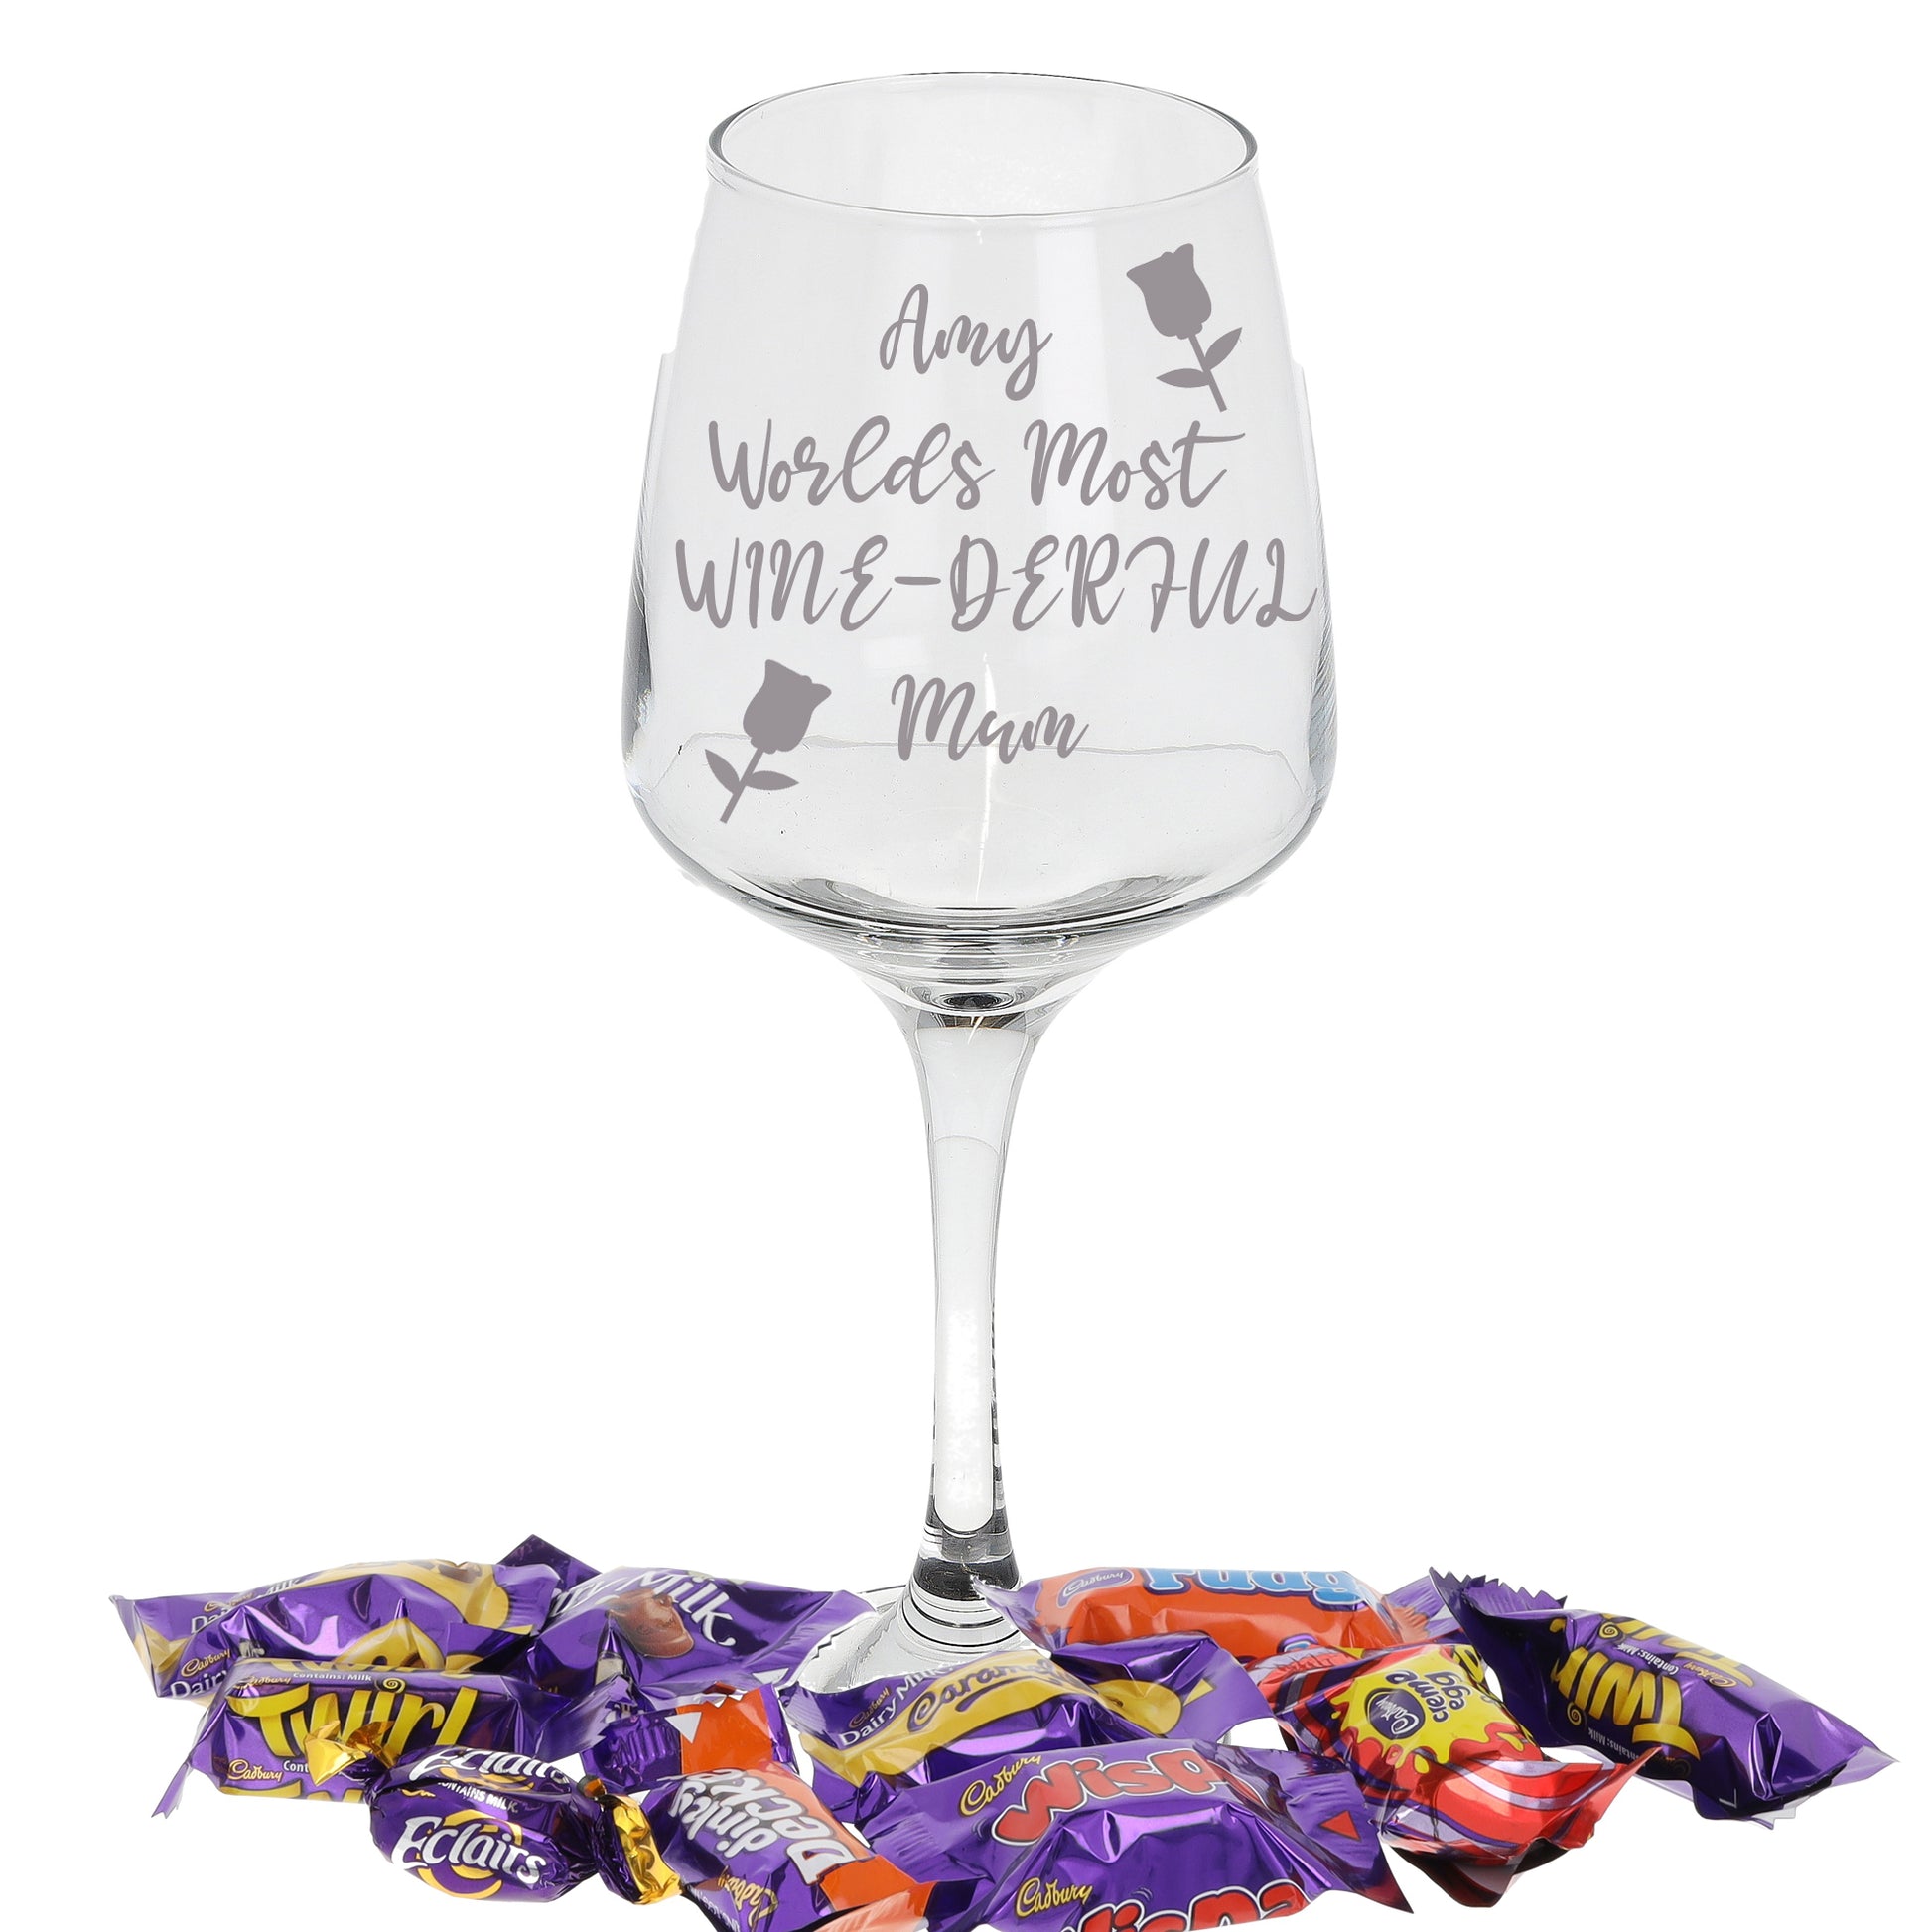 Engraved Personalised Wine-derful Wine Glass  - Always Looking Good - Small Glass Hero's  